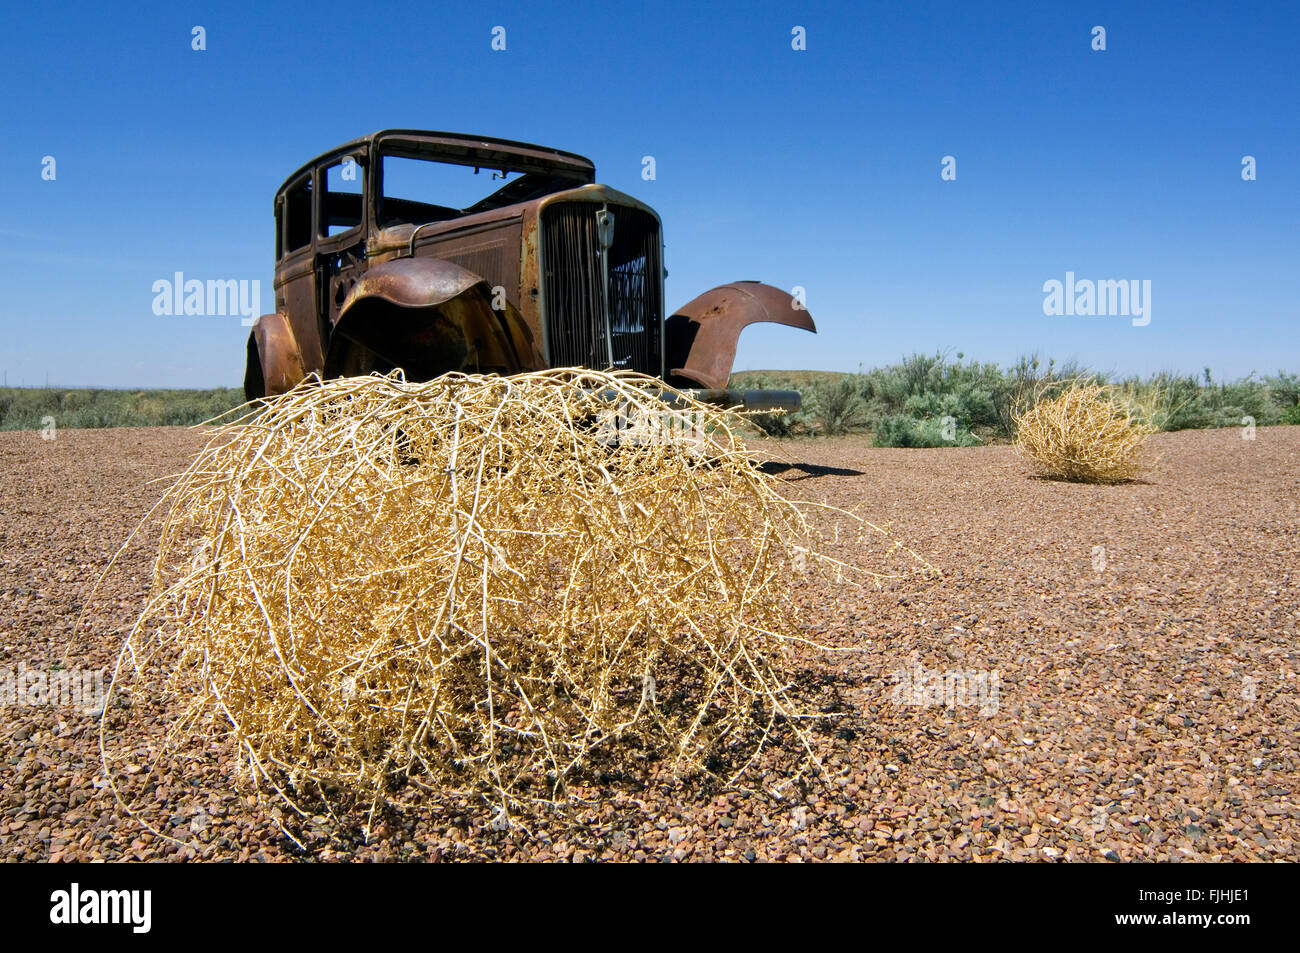 Old rusty car and Prickly Russian Thistle / Tumbleweed (Kali tragus / Salsola tragus / Salsola iberica) along Route 66, Arizona Stock Photo